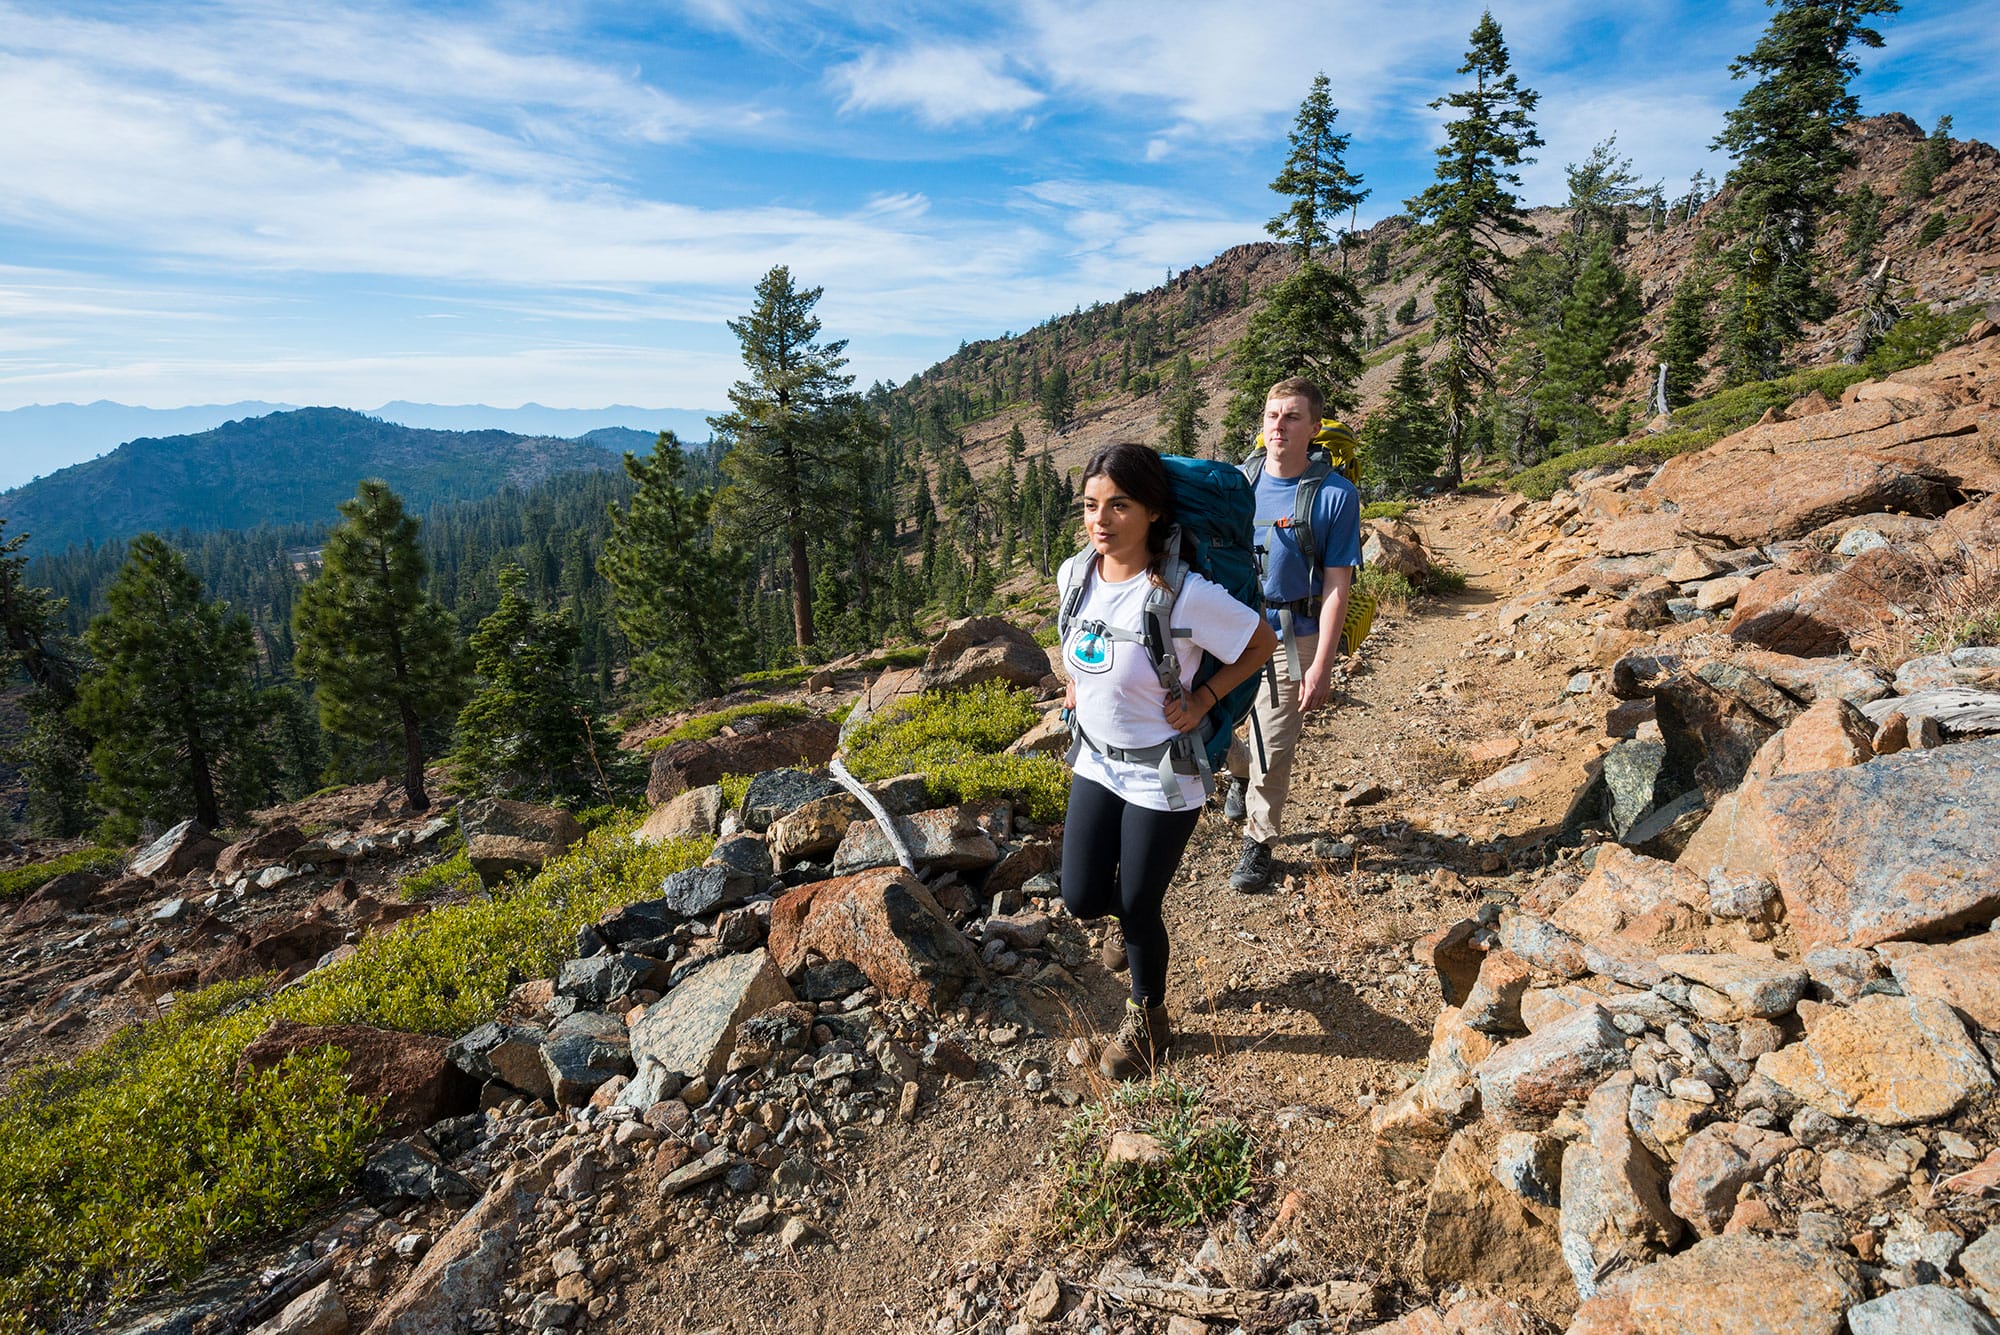 Two people hiking on a rocky trail.